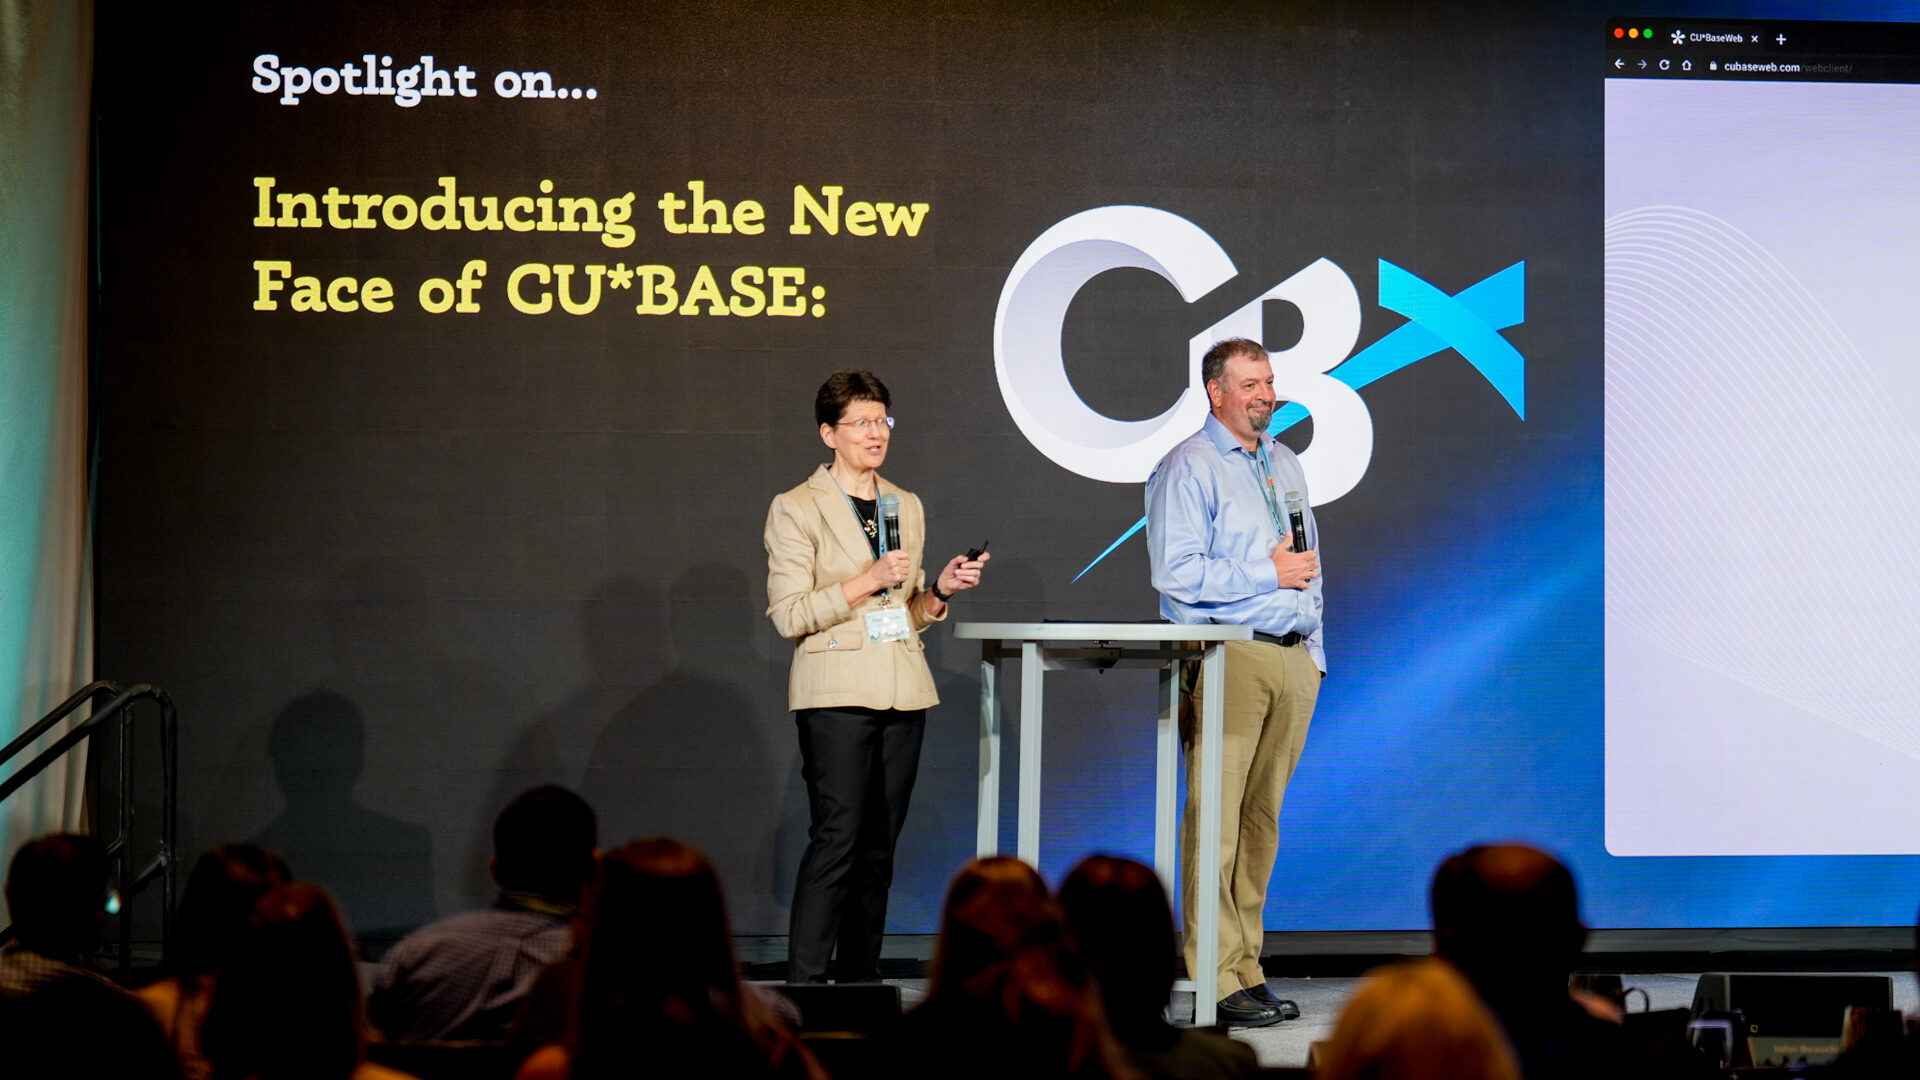 EVPs Dawn Moore and Brian Maurer introduce CBX, the new look and name of CU*BASE. 